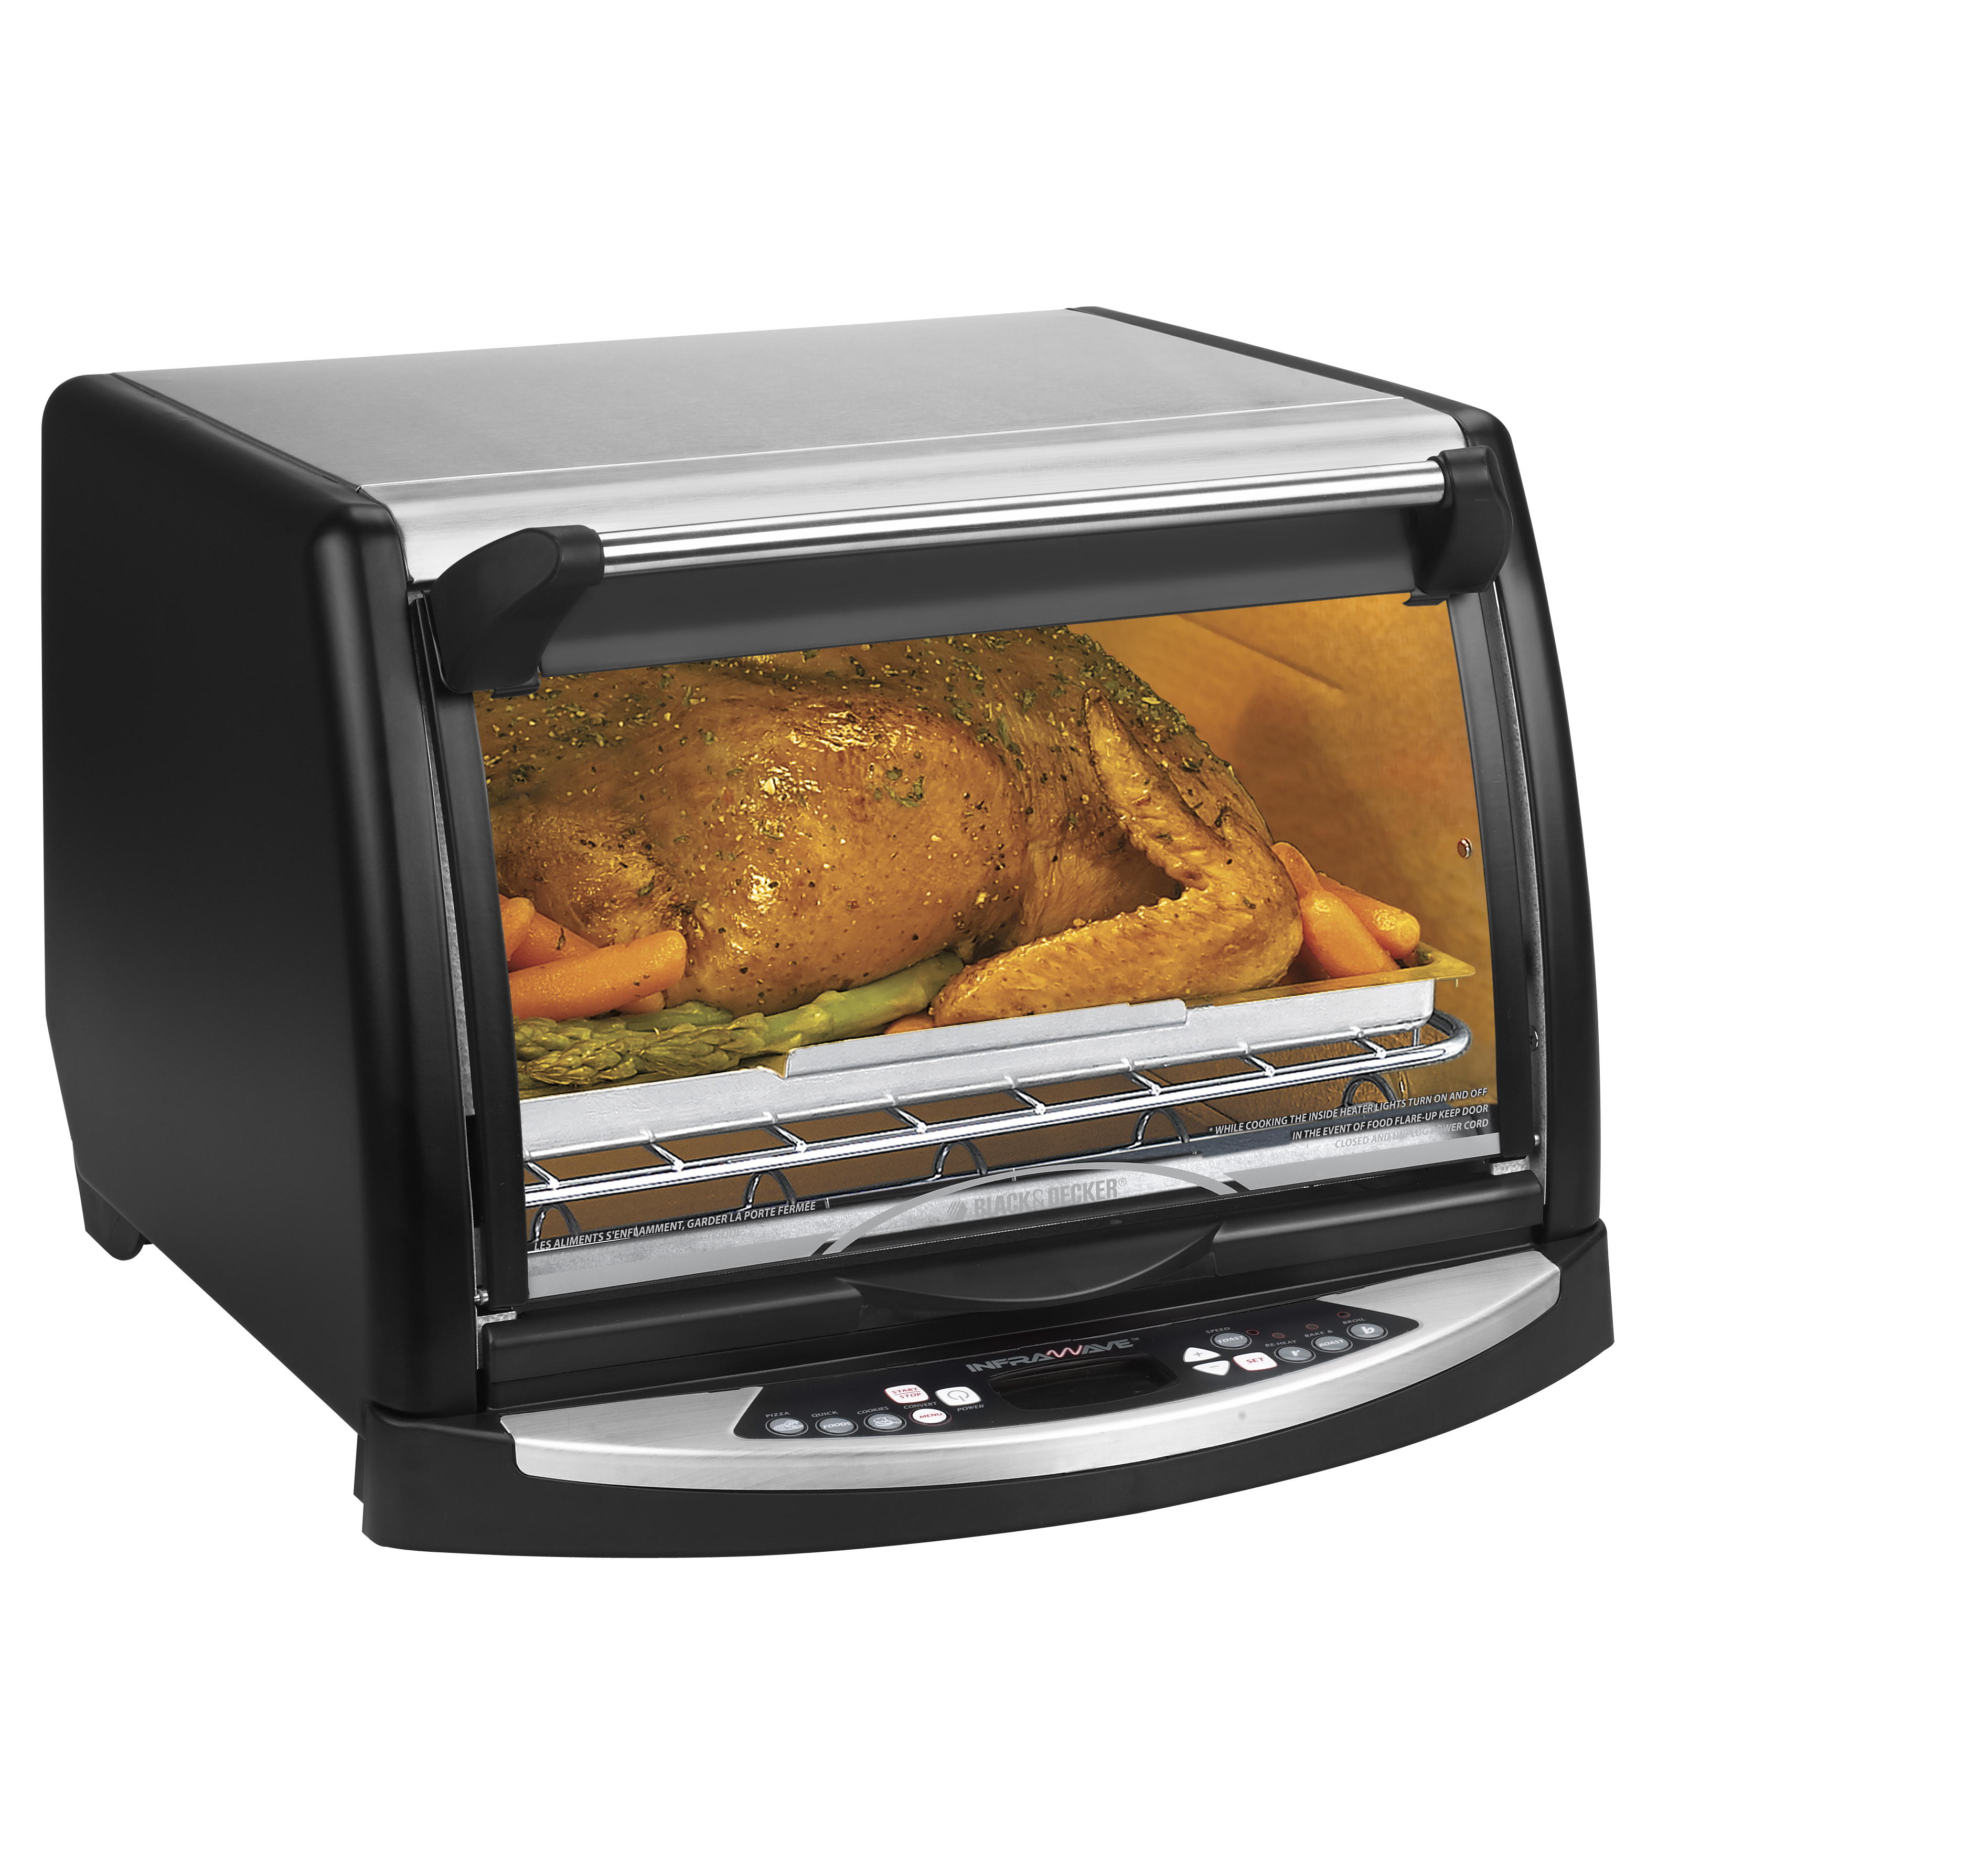 Black & Decker®* InfraWave™ Speed Oven Delivers Chef Quality Meals At